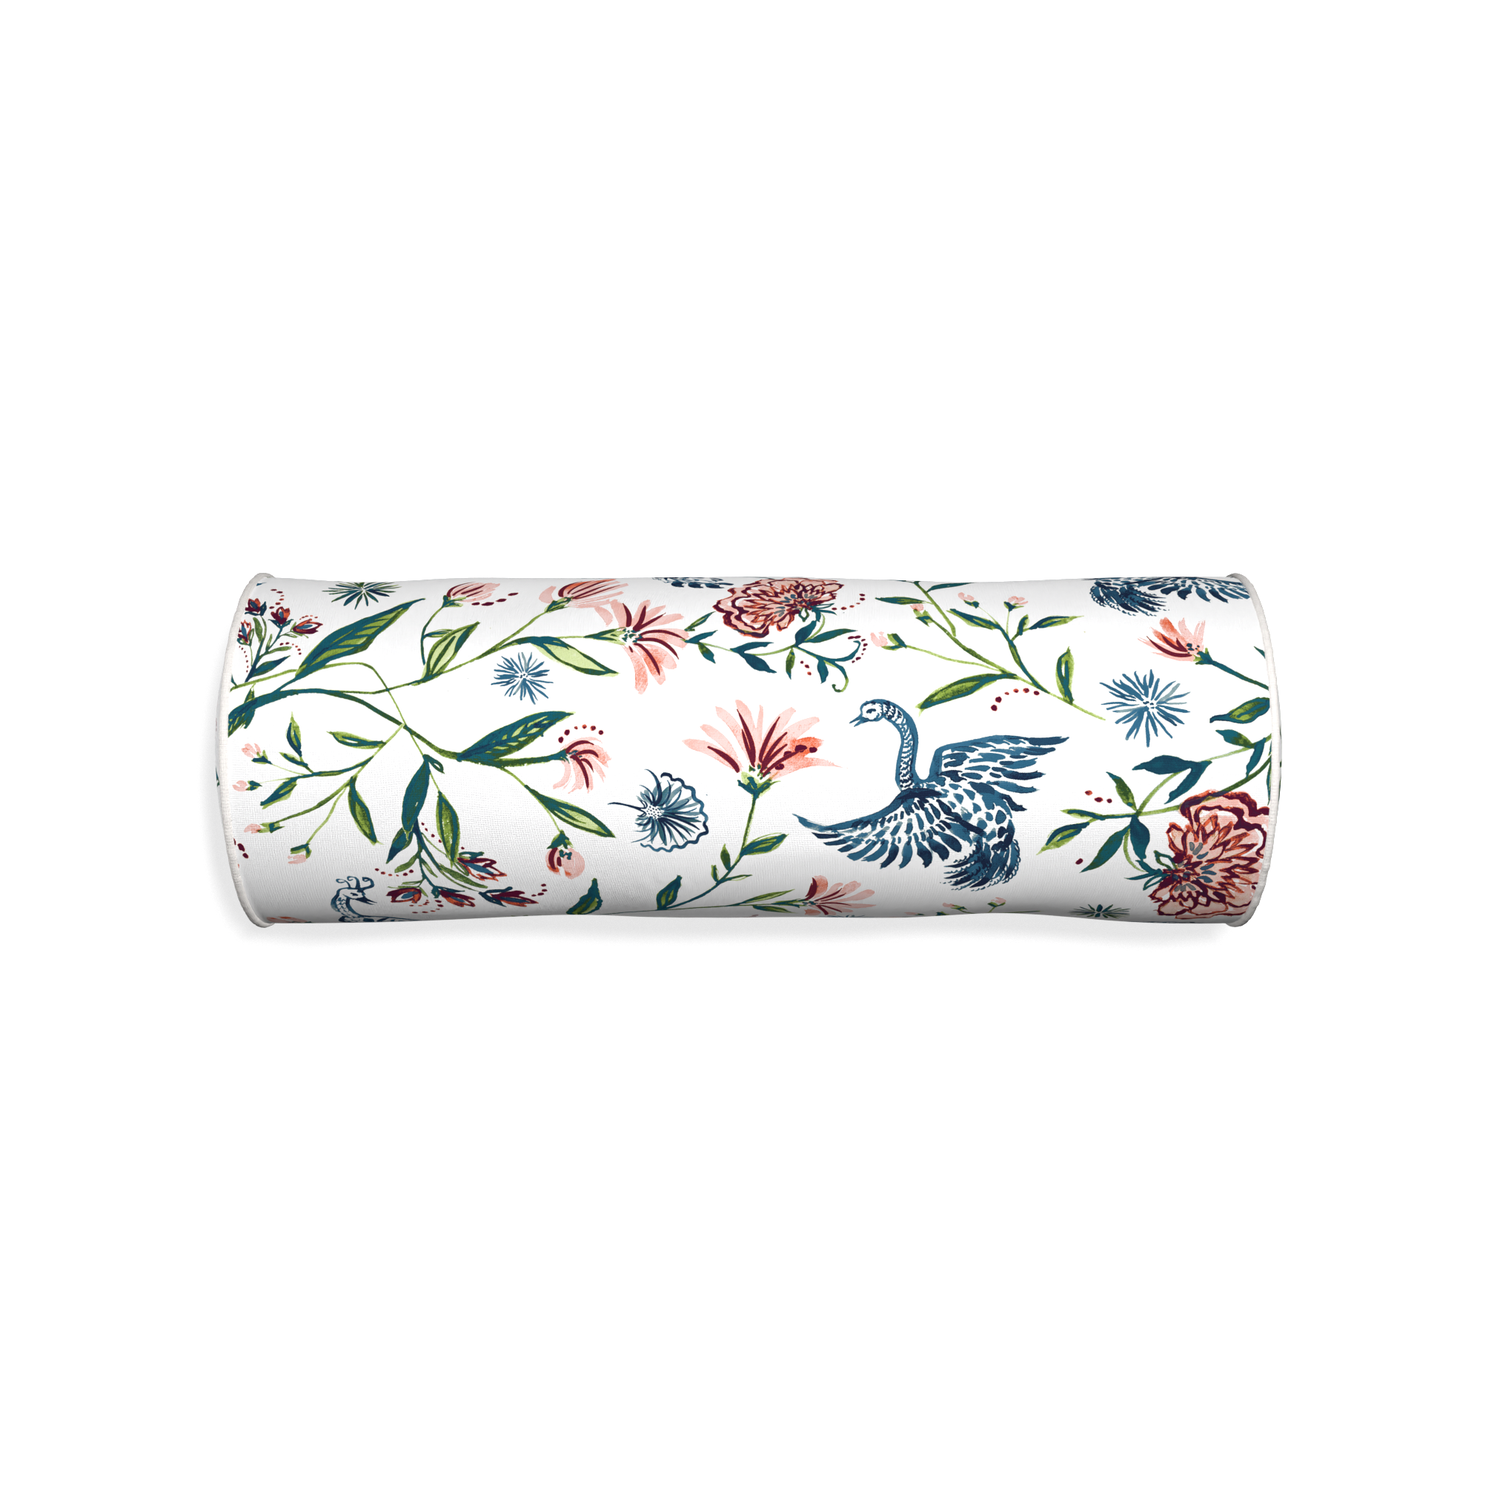 Bolster daphne cream custom cream chinoiseriepillow with snow piping on white background